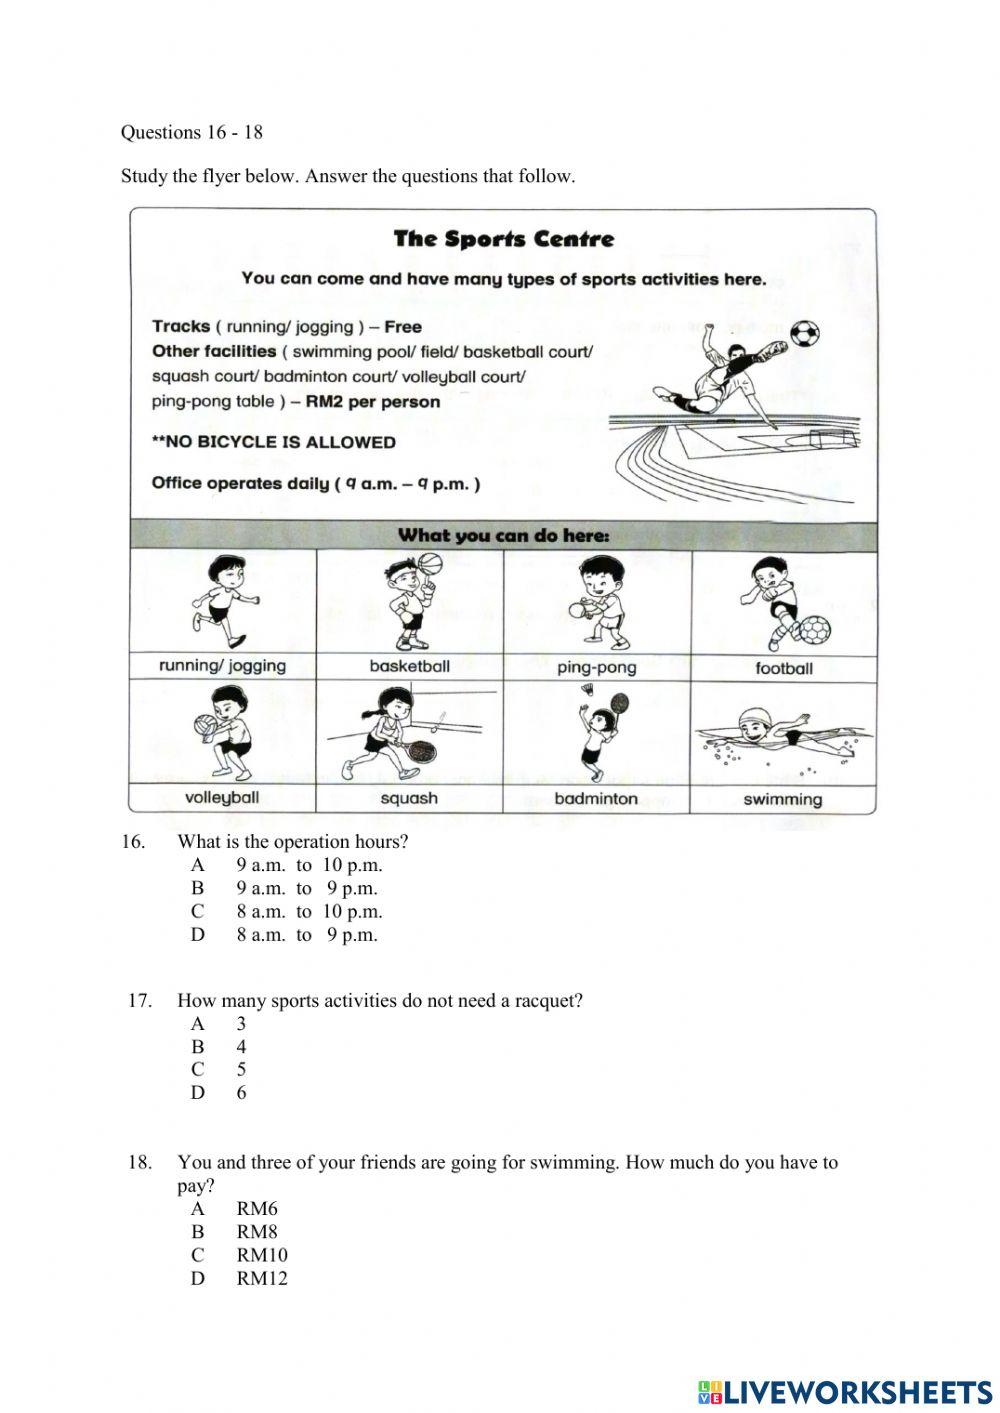 Exercise paper 1